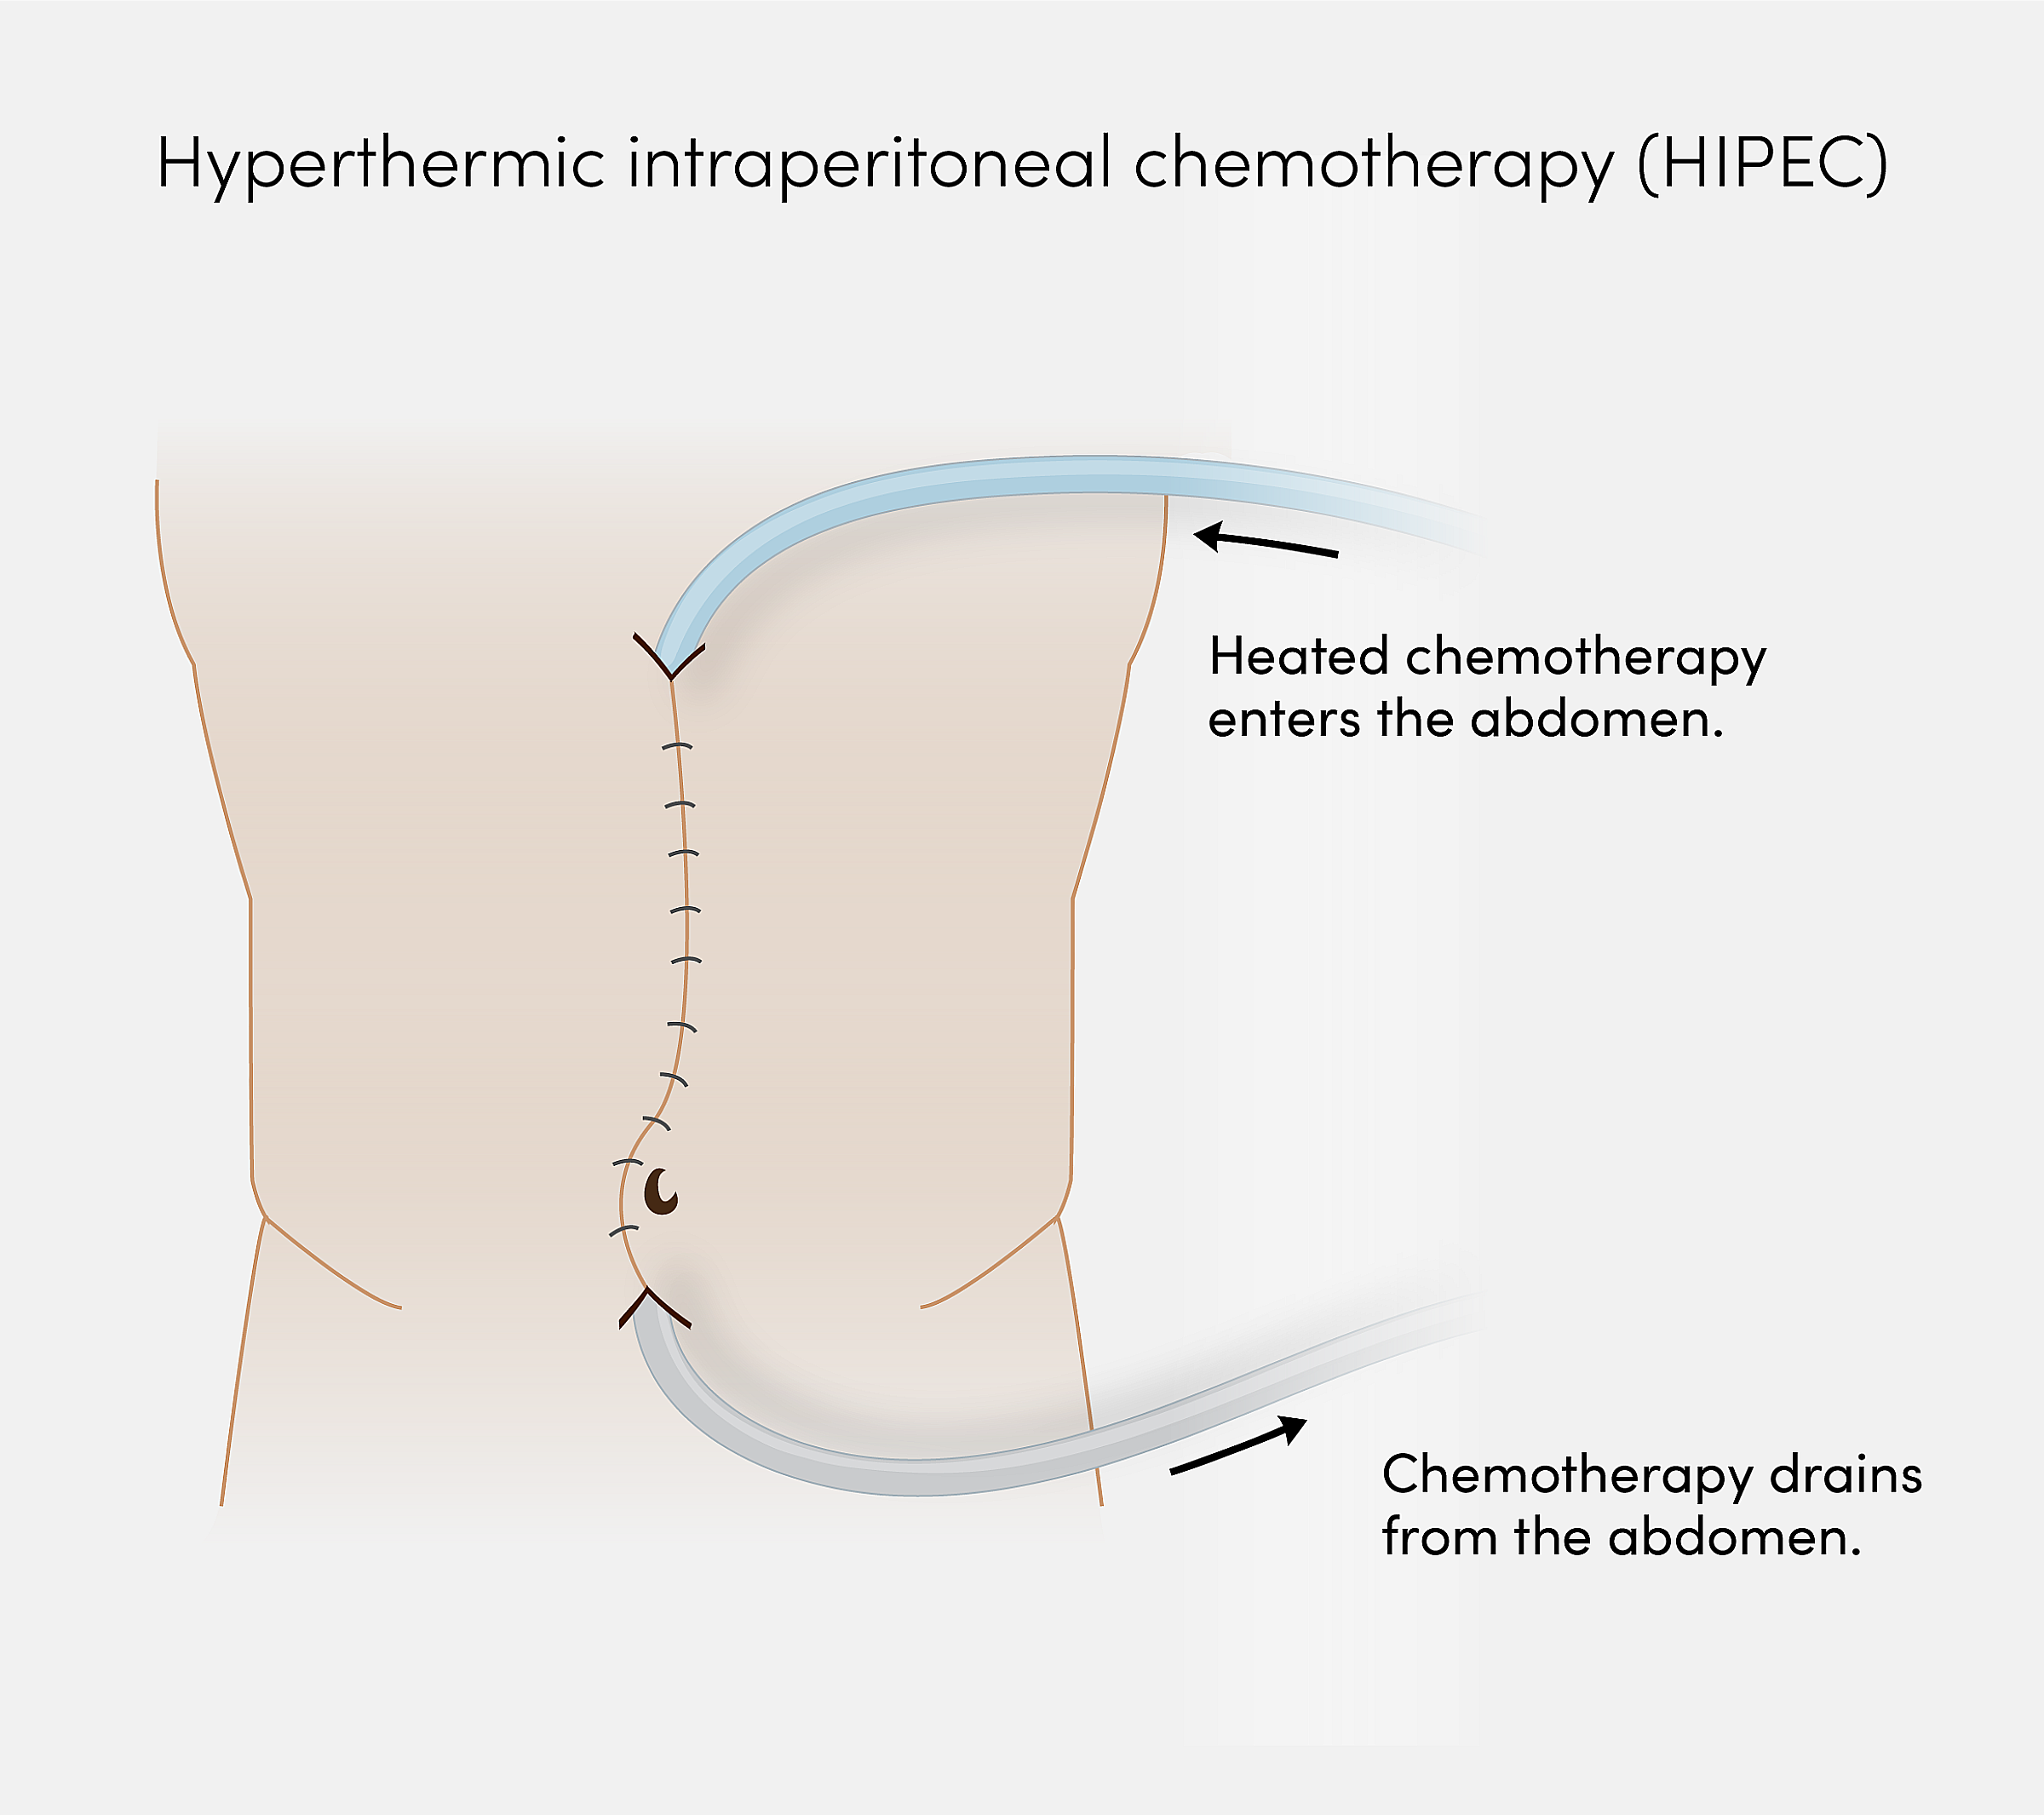 Illustration of tubes filling an abdomen with heated chemotherapy and then draining it out